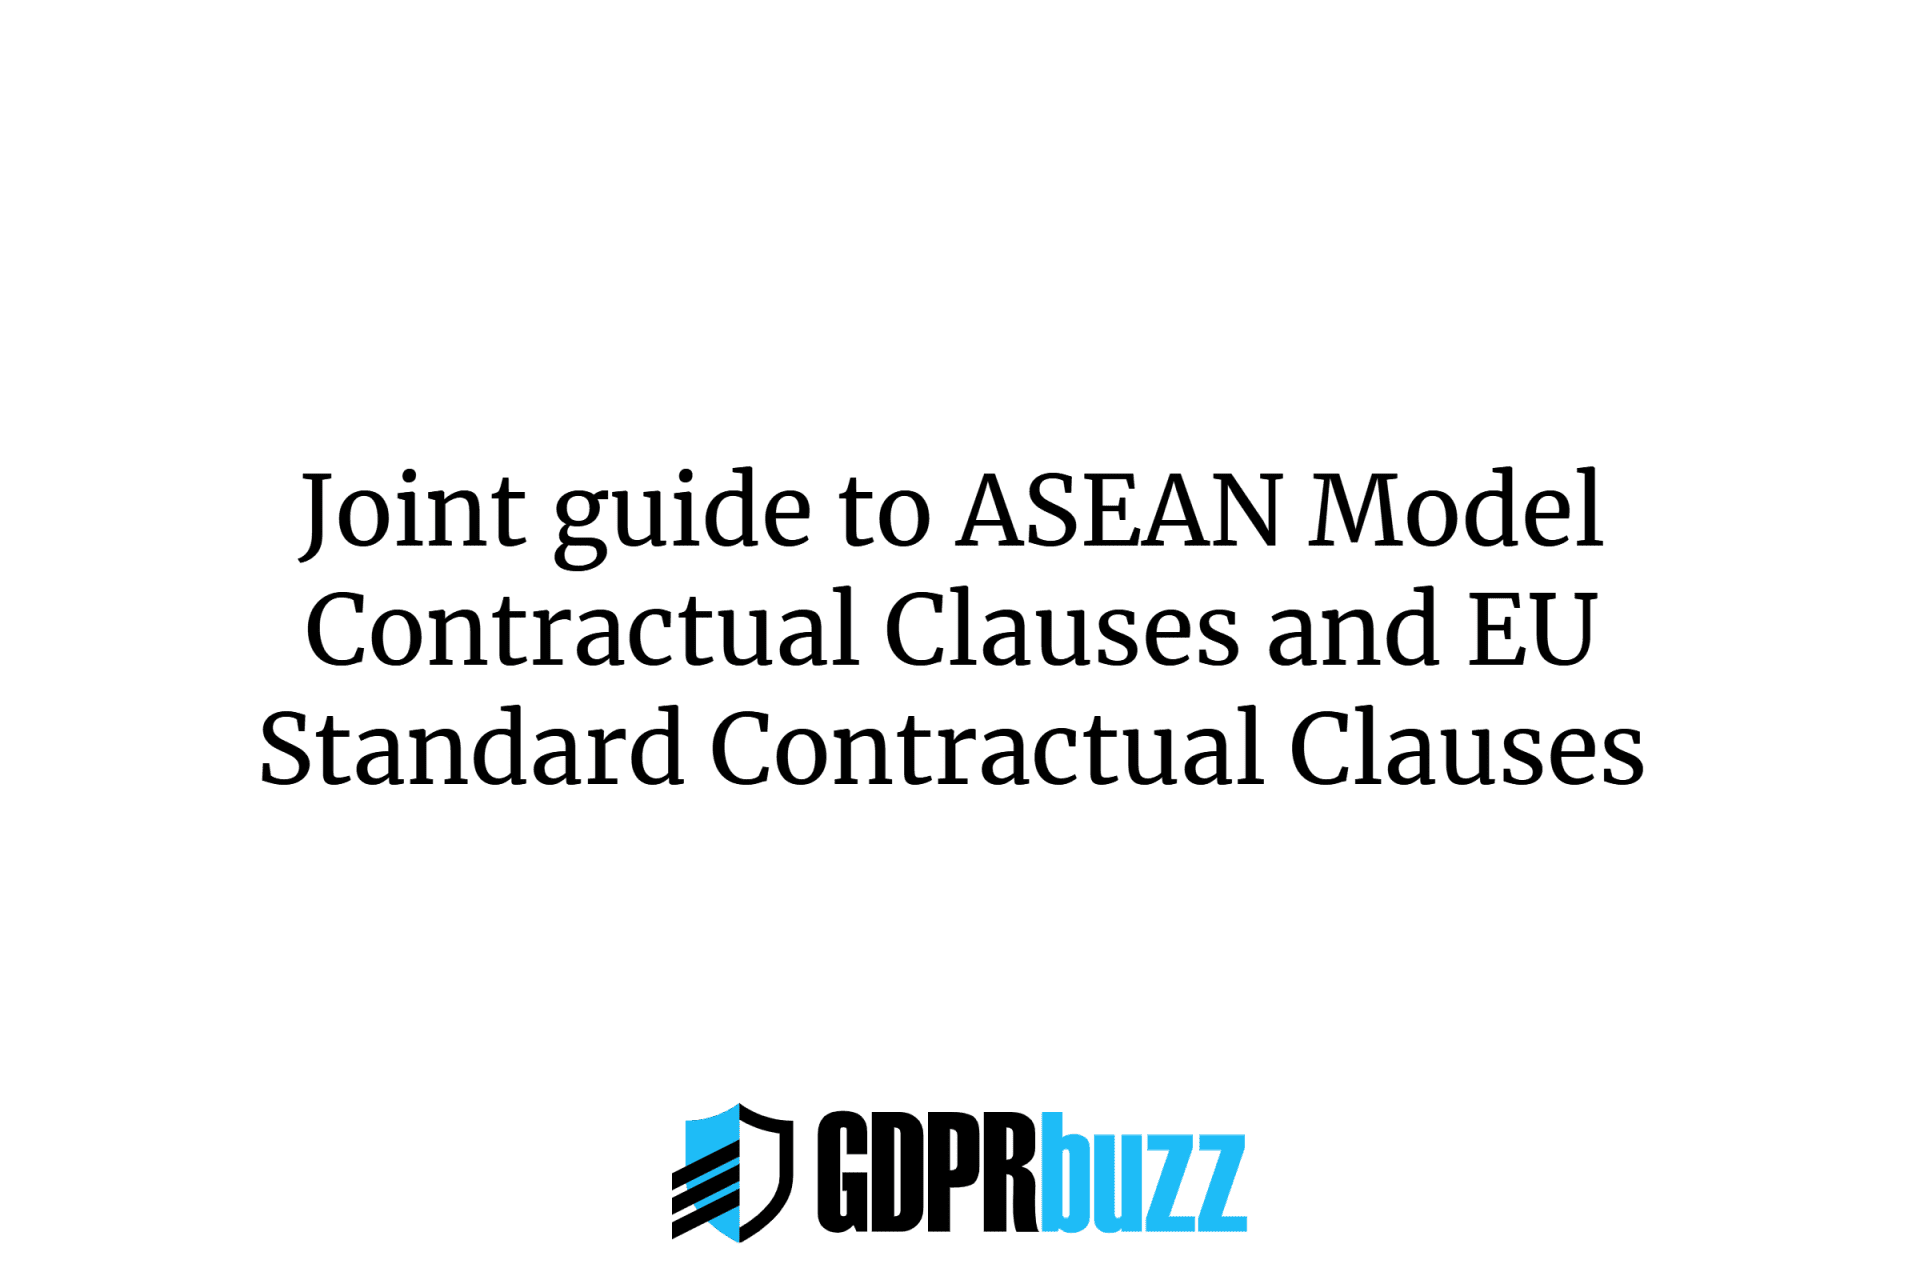 Joint guide to asean model contractual clauses and eu standard contractual clauses